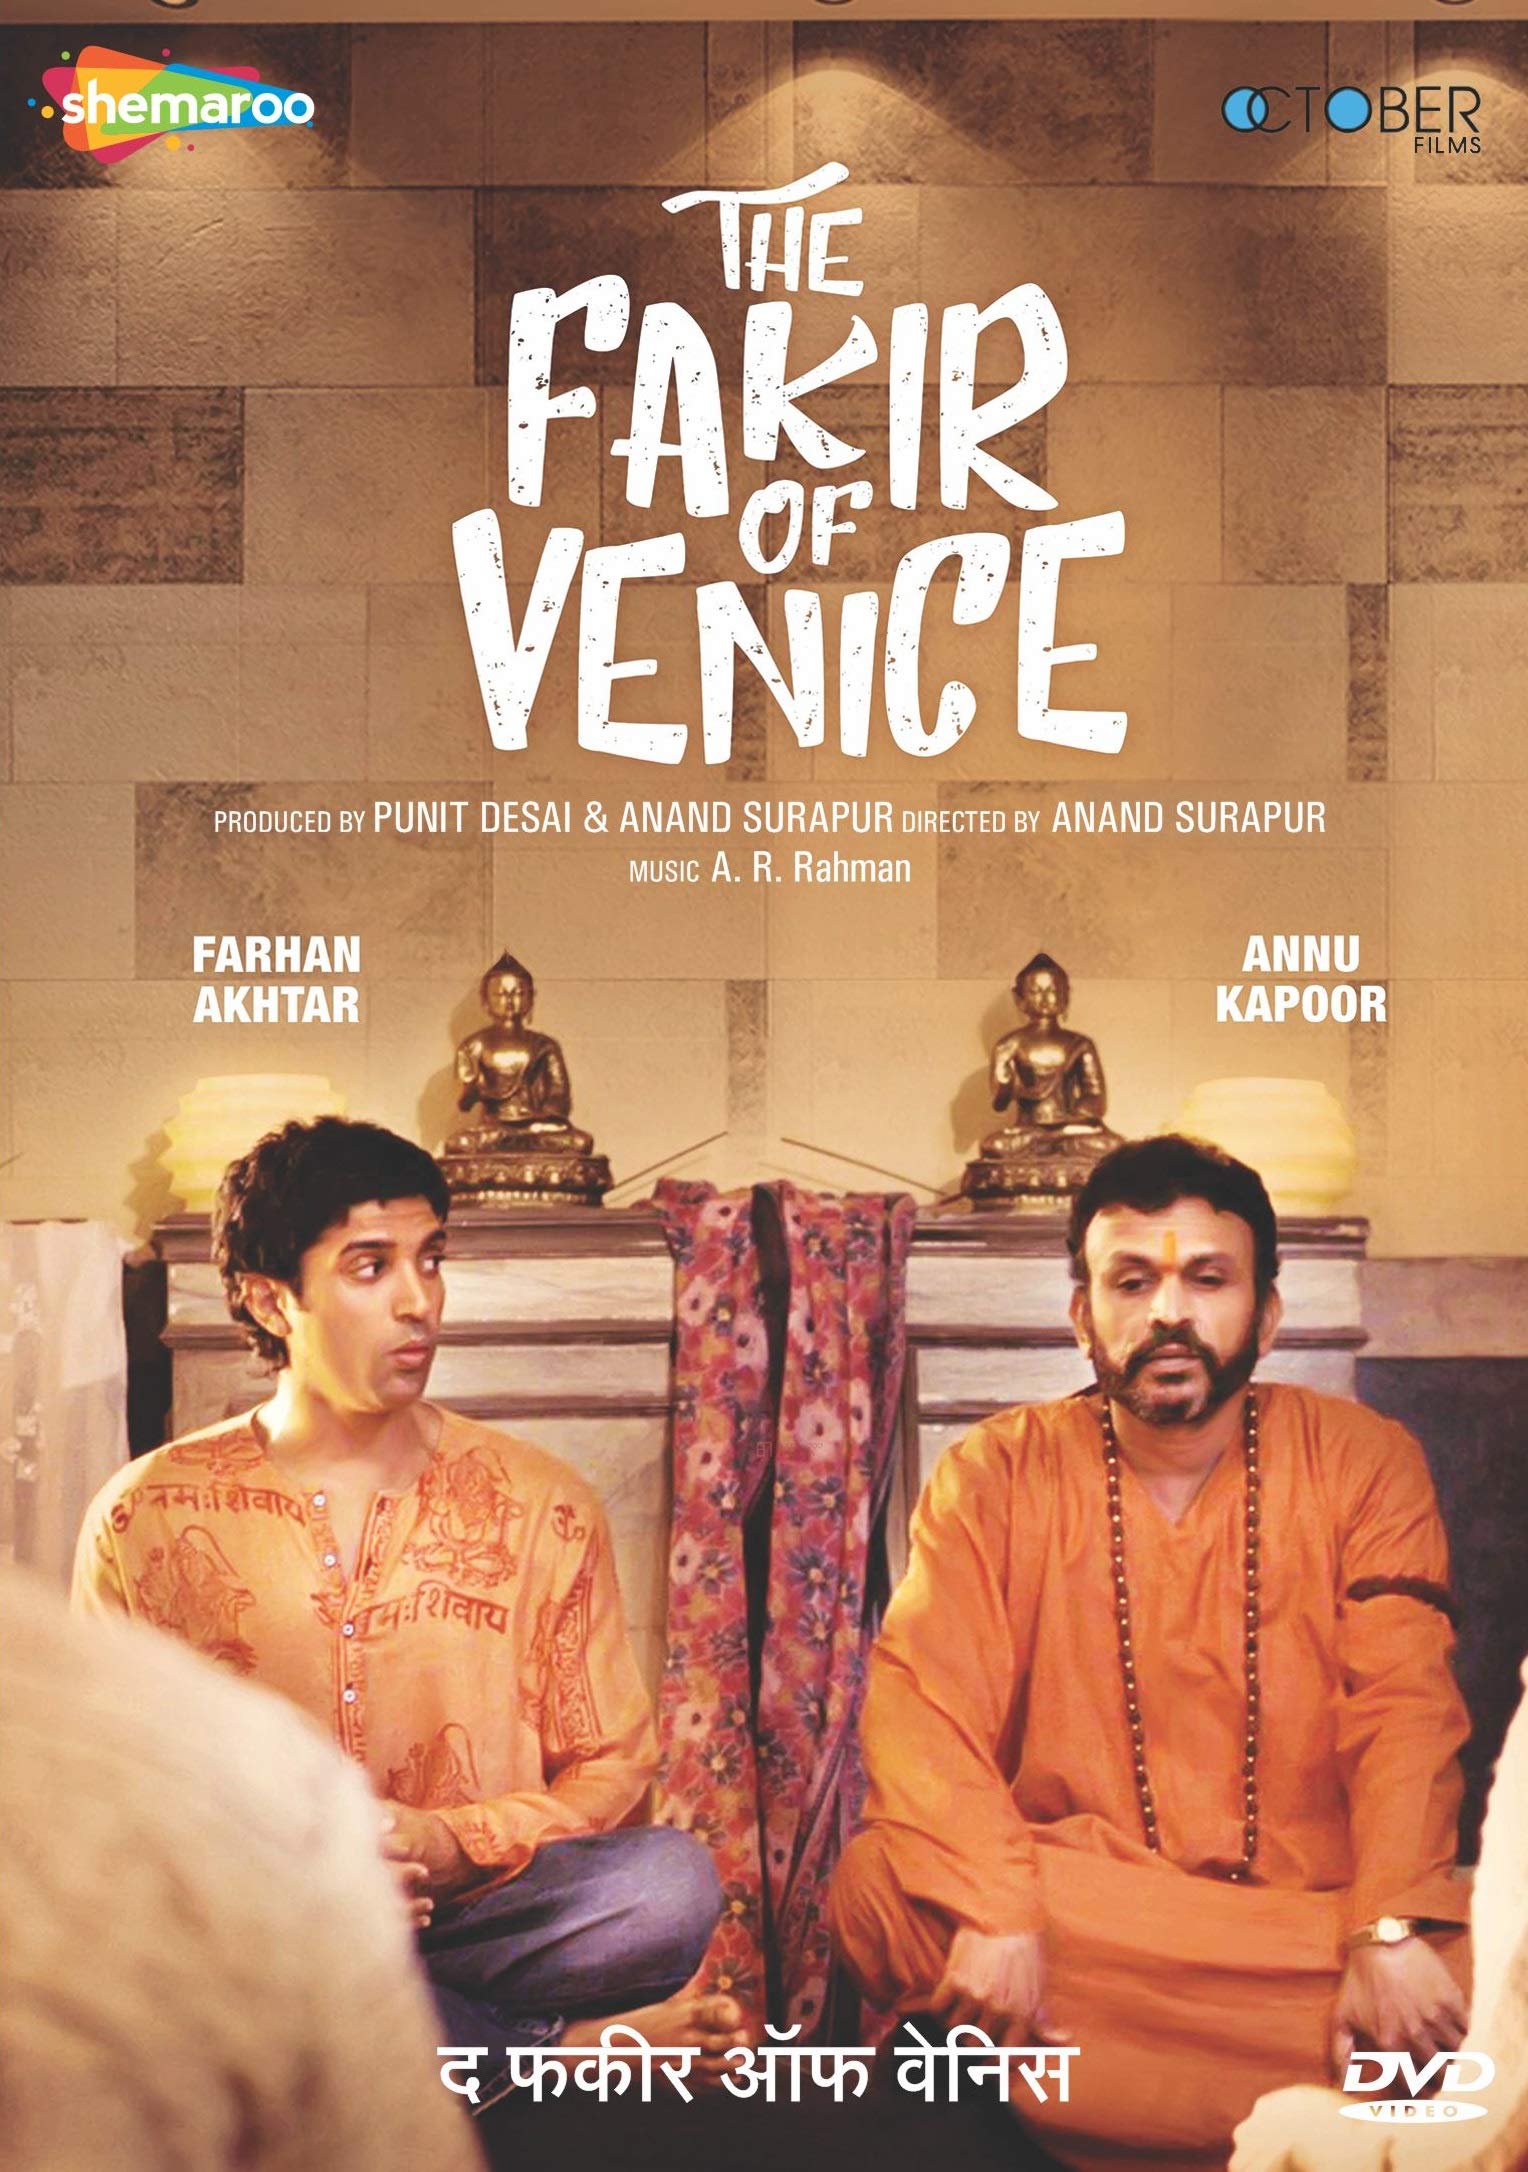 the-fakir-of-venice-movie-purchase-or-watch-online